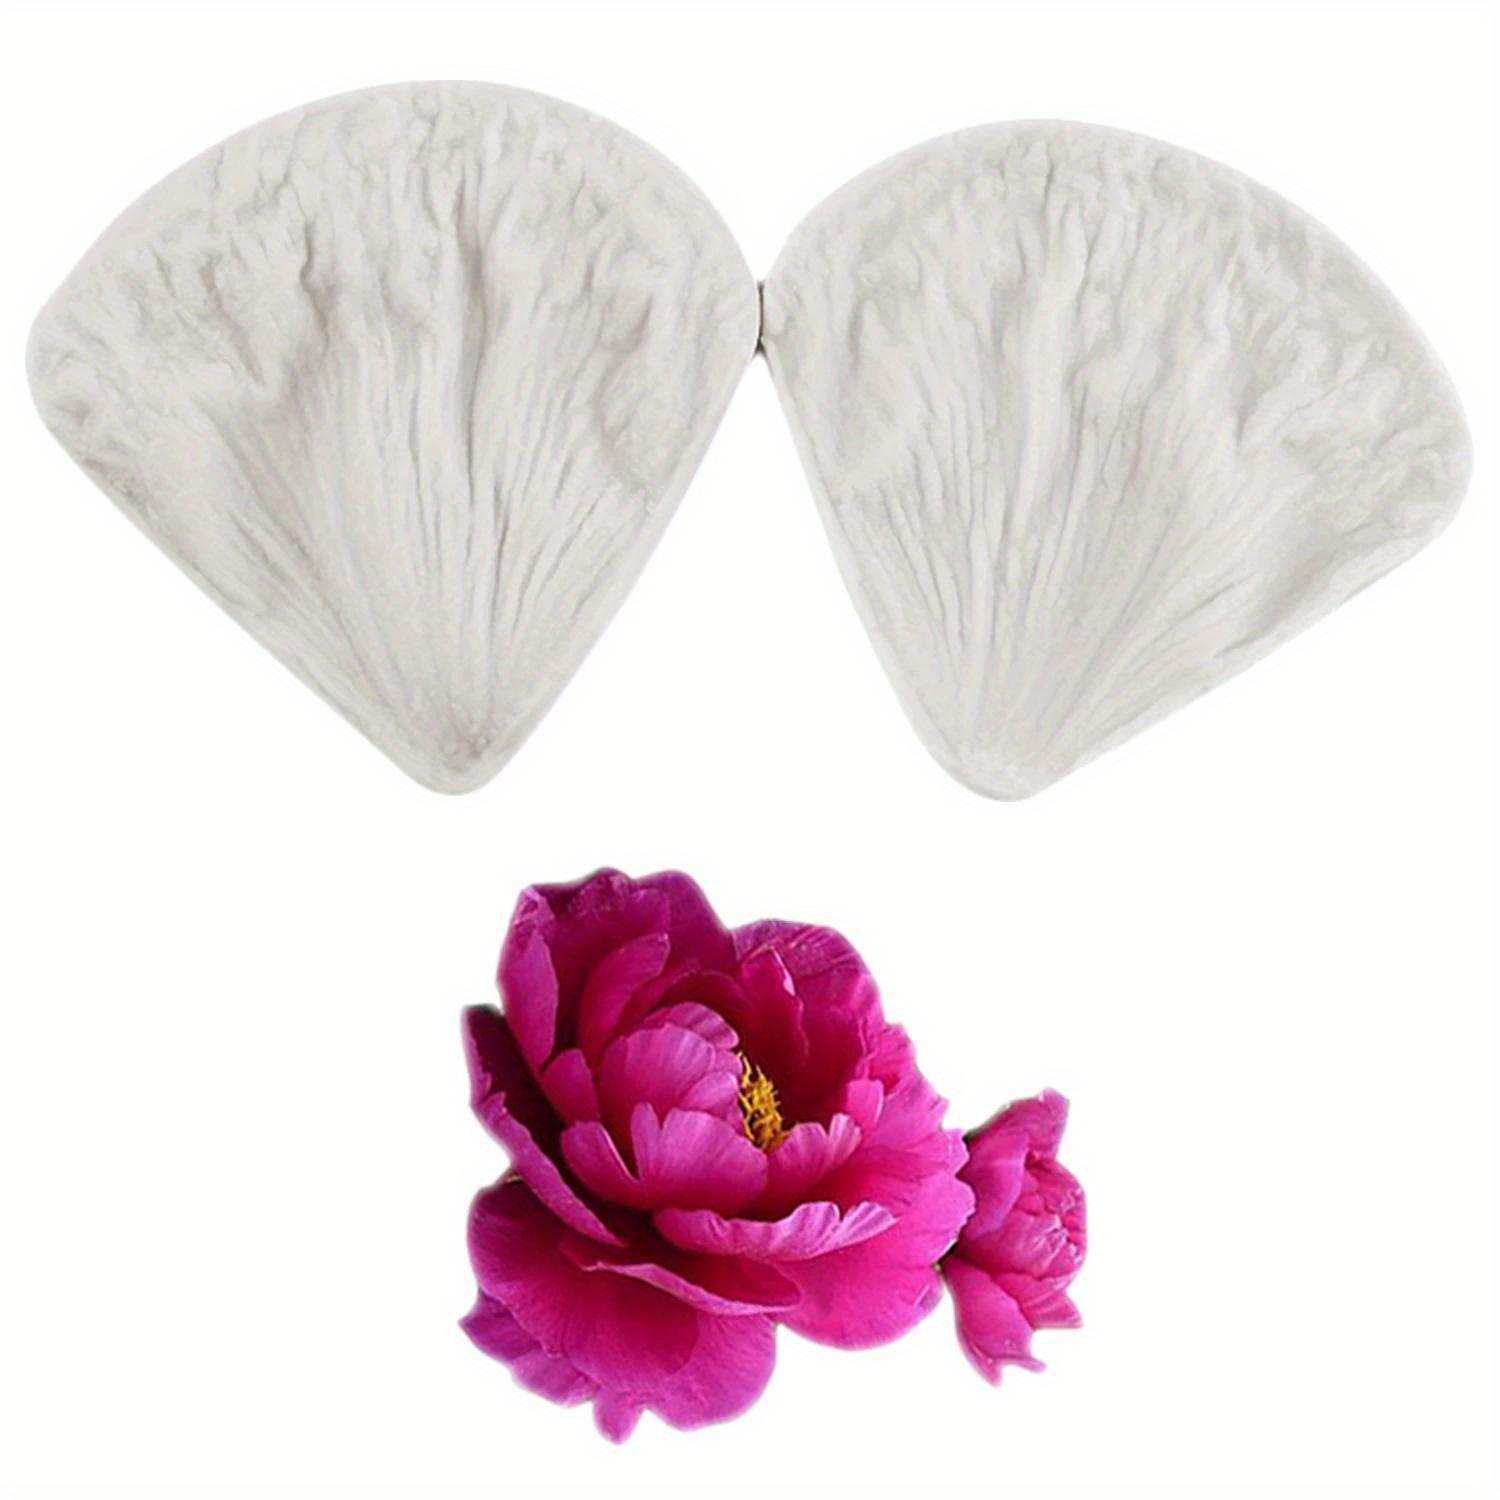 

2pcs Peony Flower Petals Silicone Molds Diy Fondant Cake Decorating Tools Chocolate Cupcake Topper Mold Candy Polymer Clay Moulds